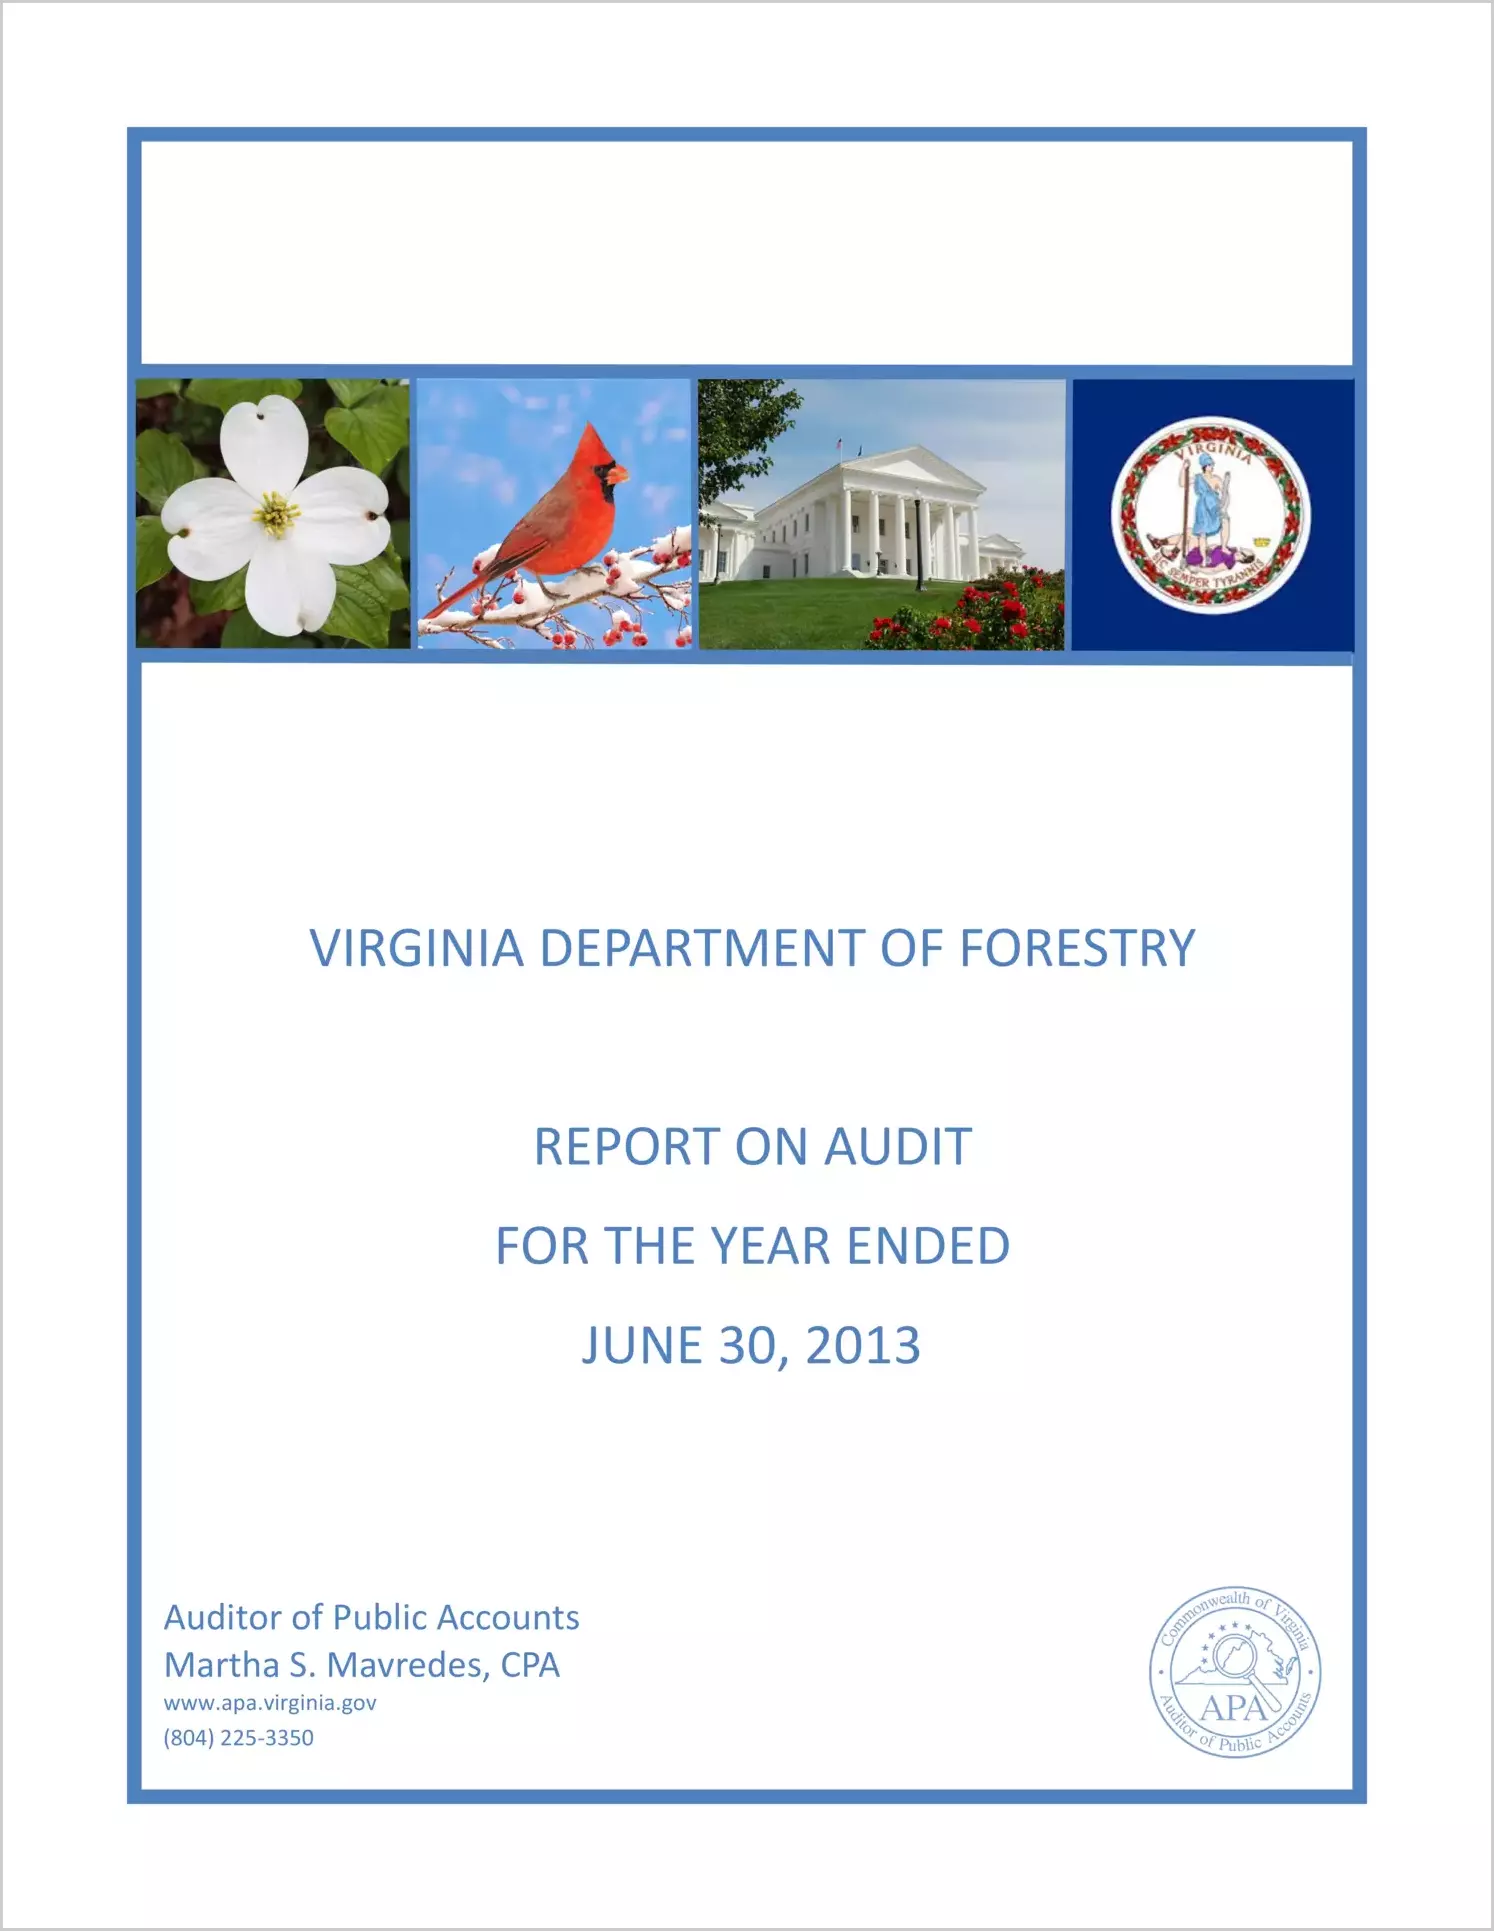 Virginia Department of Forestry for the year ended June 30, 2013